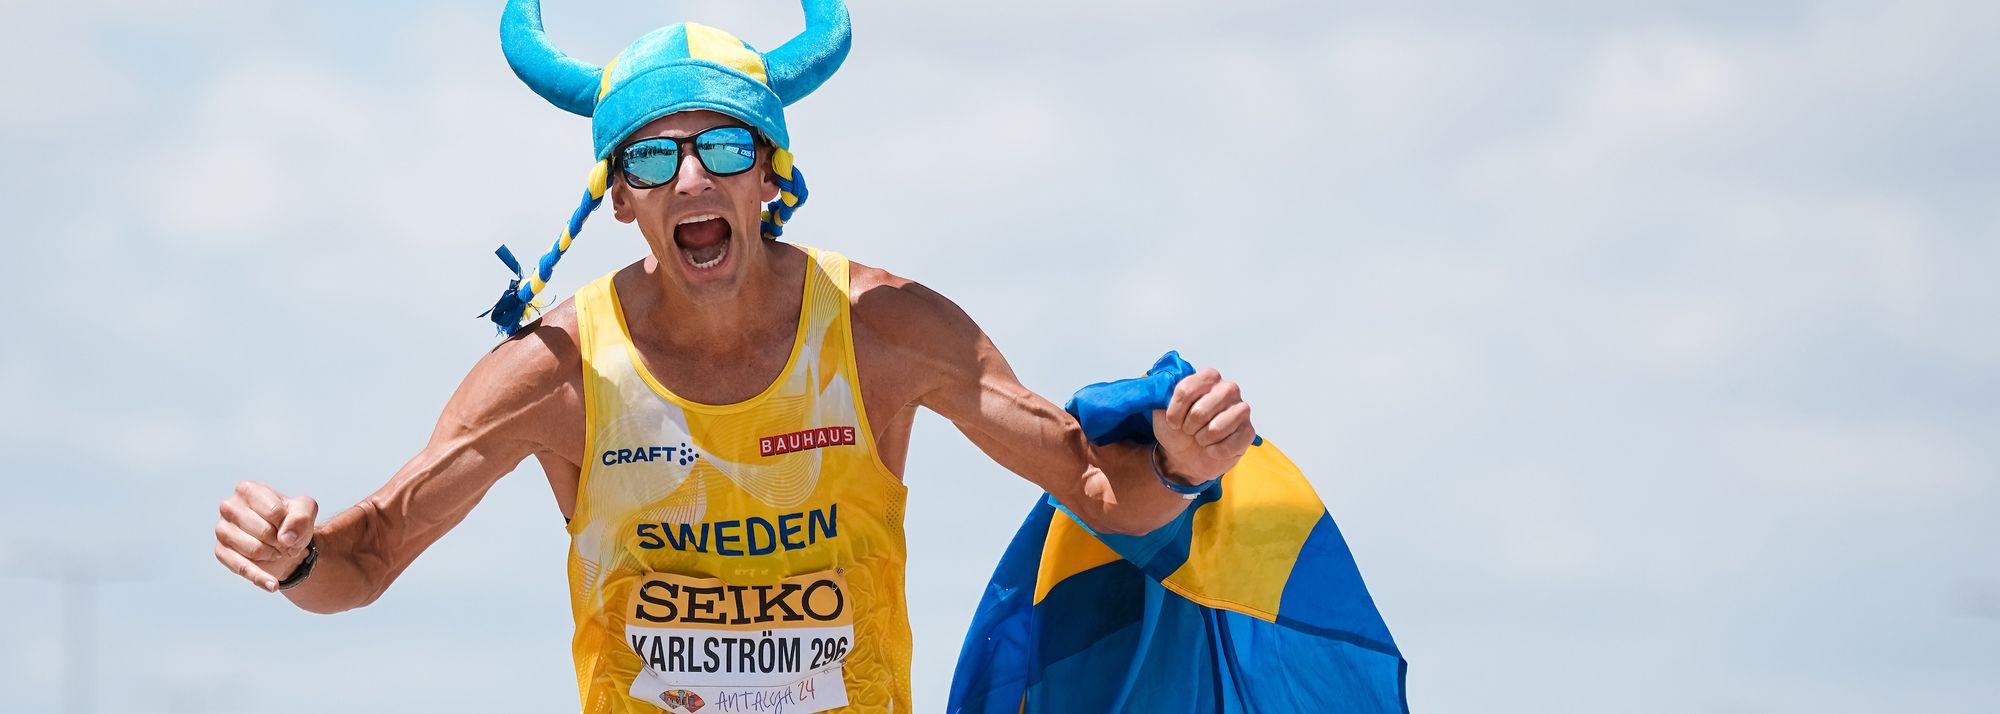 Two years after his 35km success in Muscat, Sweden’s Perseus Karlstrom emerged as the 20km champion at the World Athletics Race Walking Team Championships Antalya 24